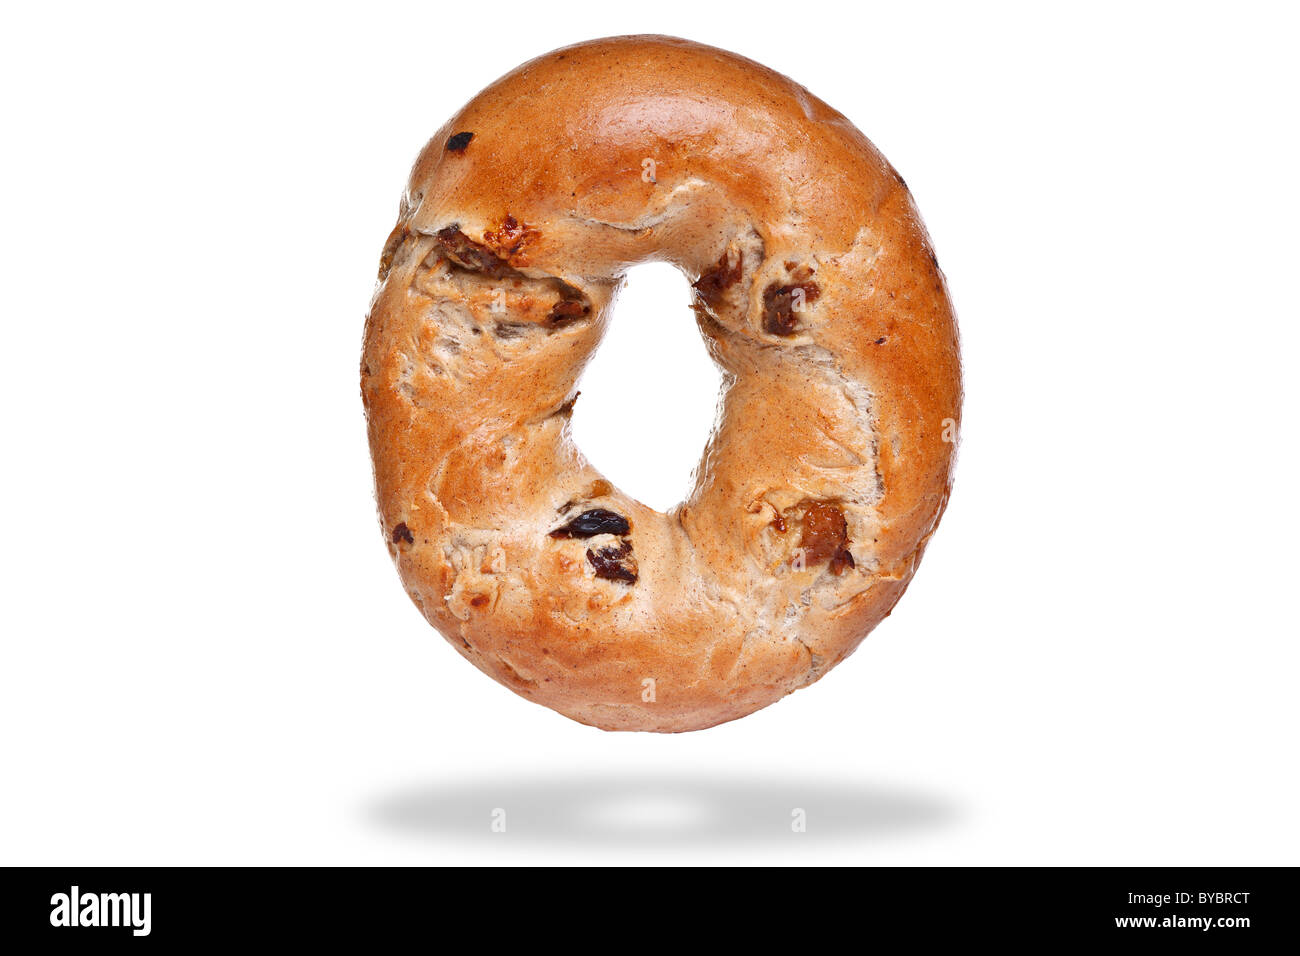 Photo of a cinnamon and raisin bagel, isolated on a white background with floating shadow. Stock Photo